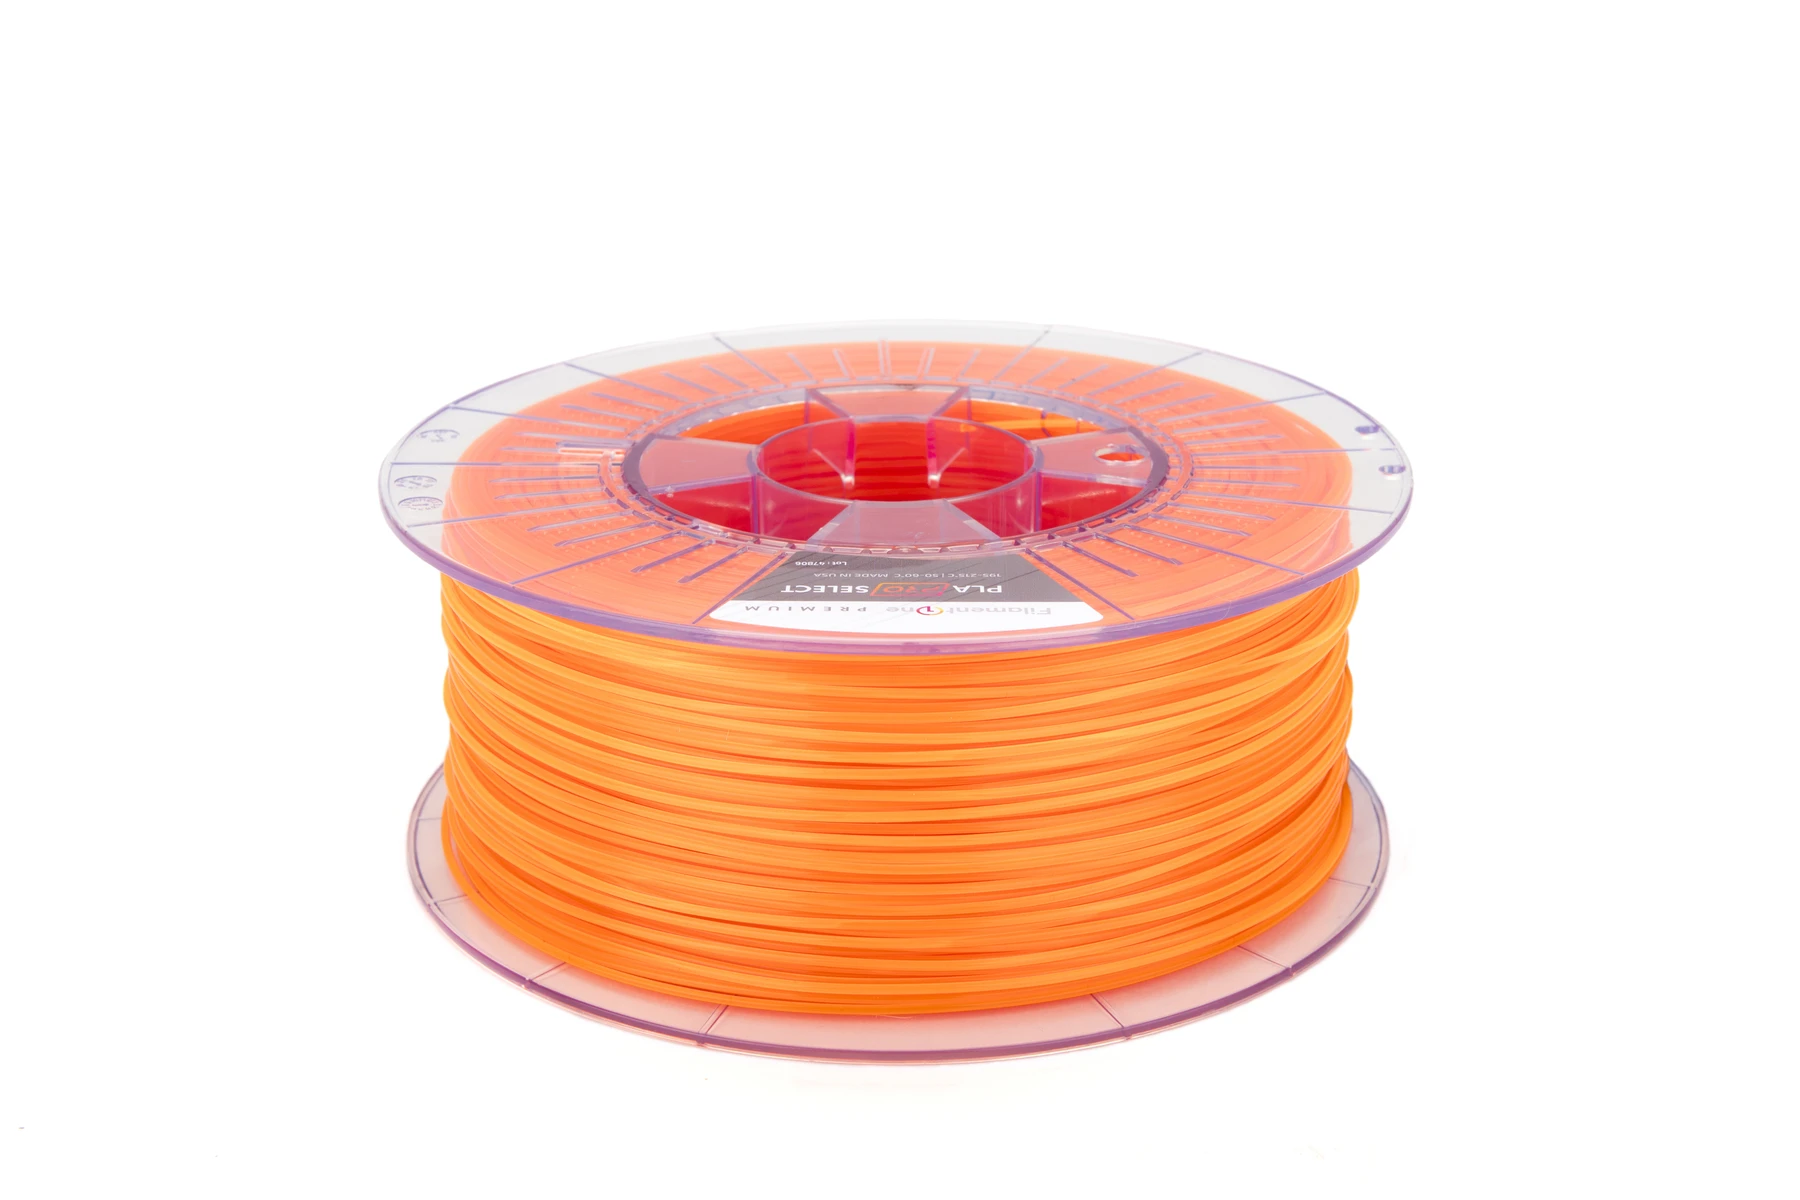 The brighter than your future orange from Filament one 3D printing reel.